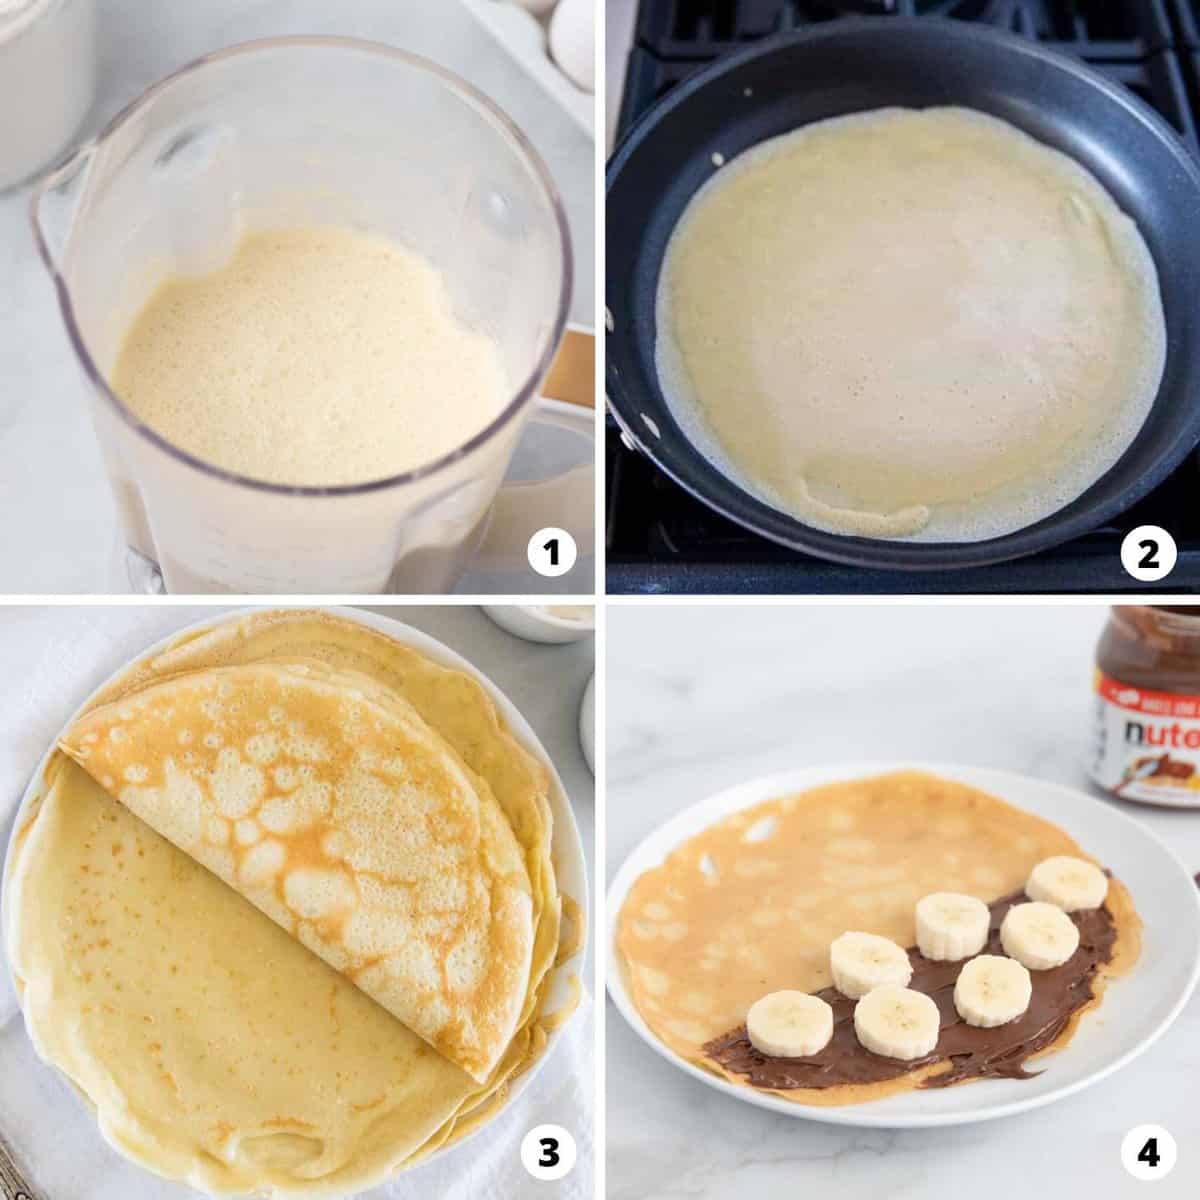 The process of making crepes in four steps. 